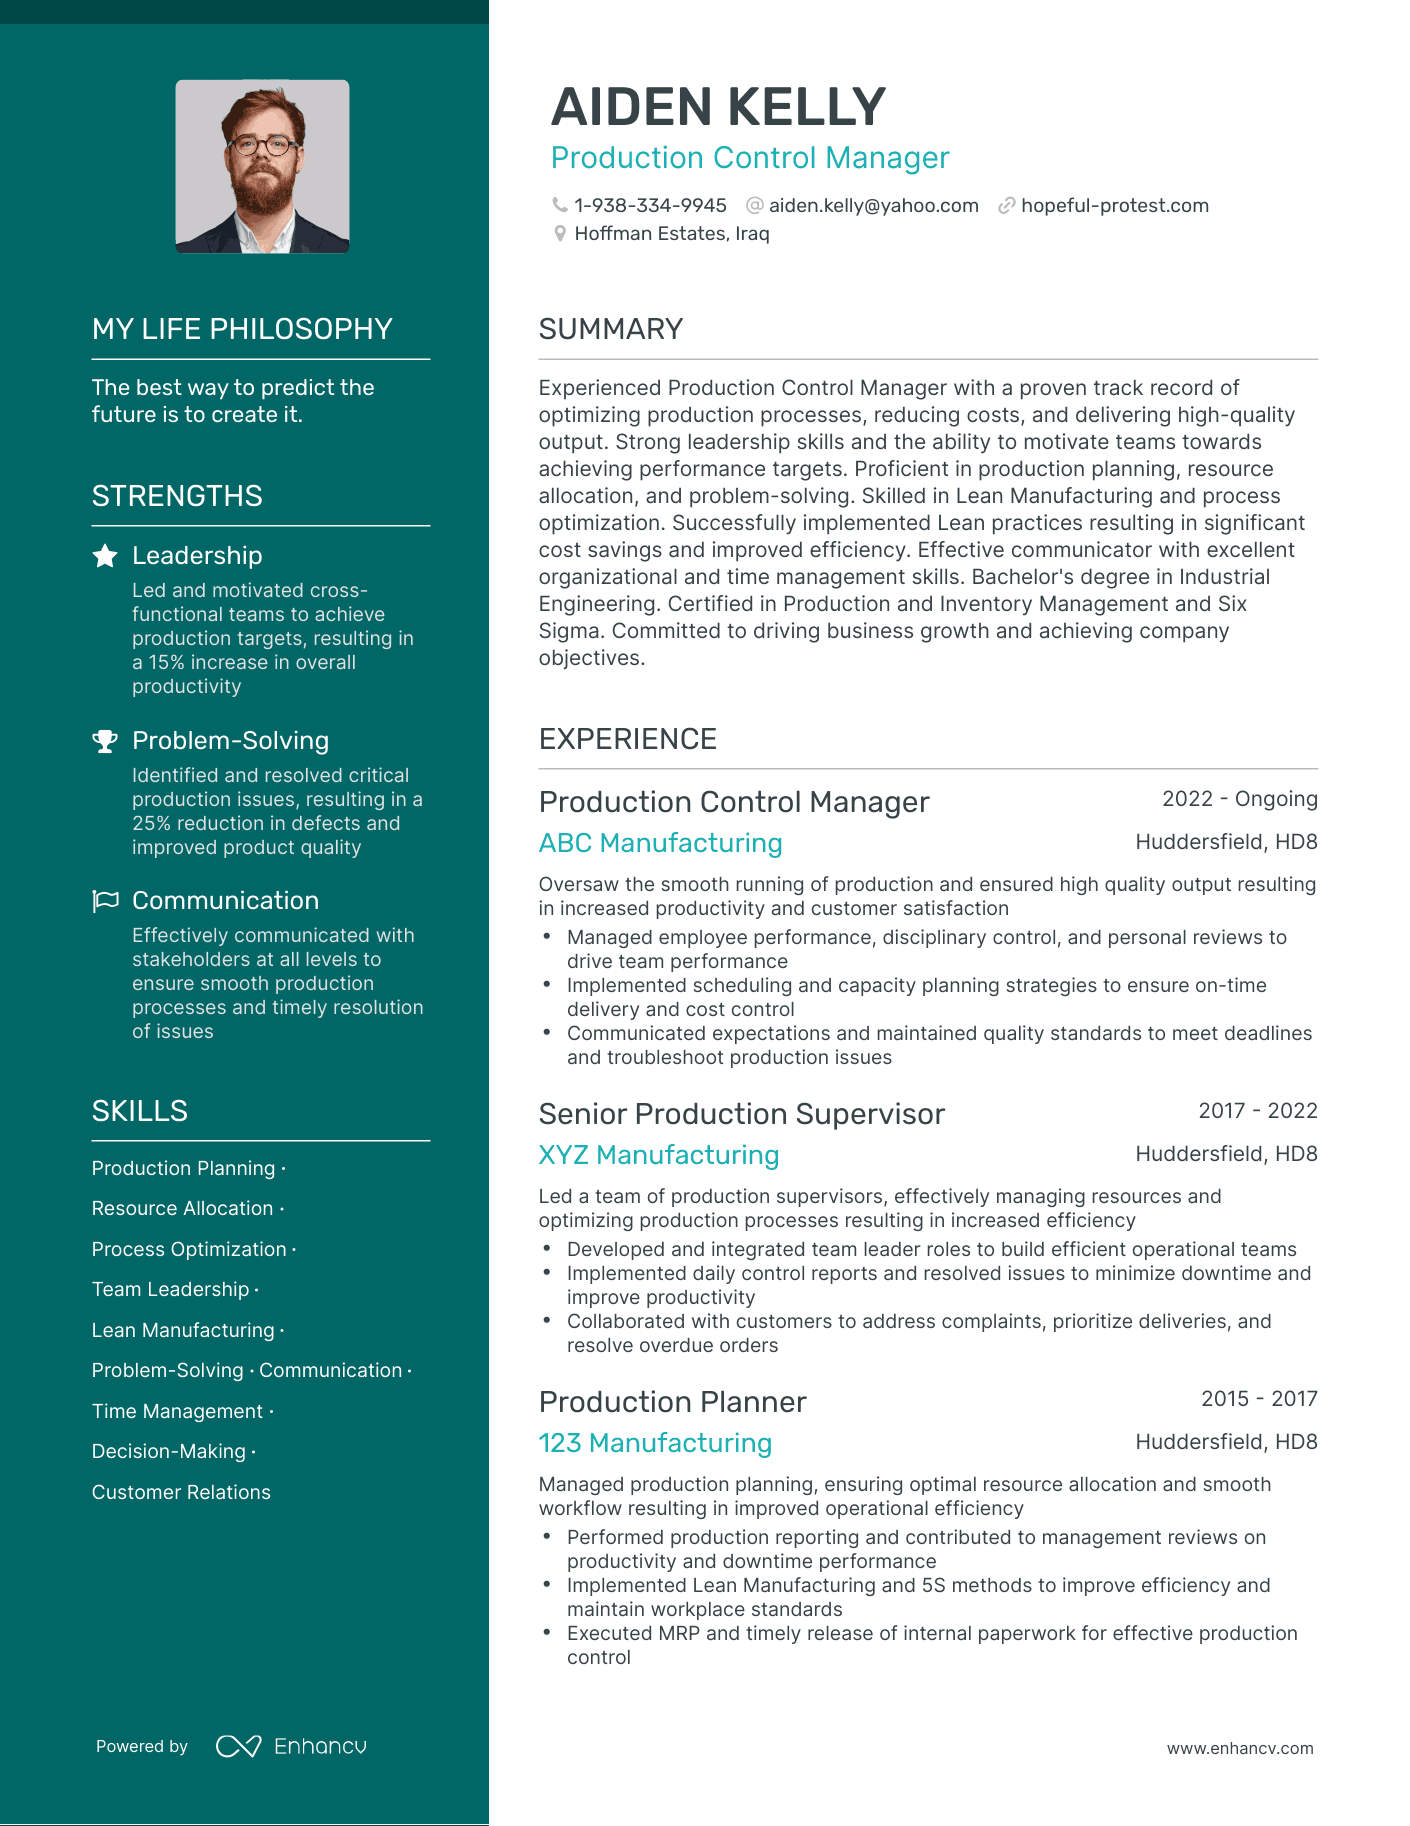 Production Control Manager resume example